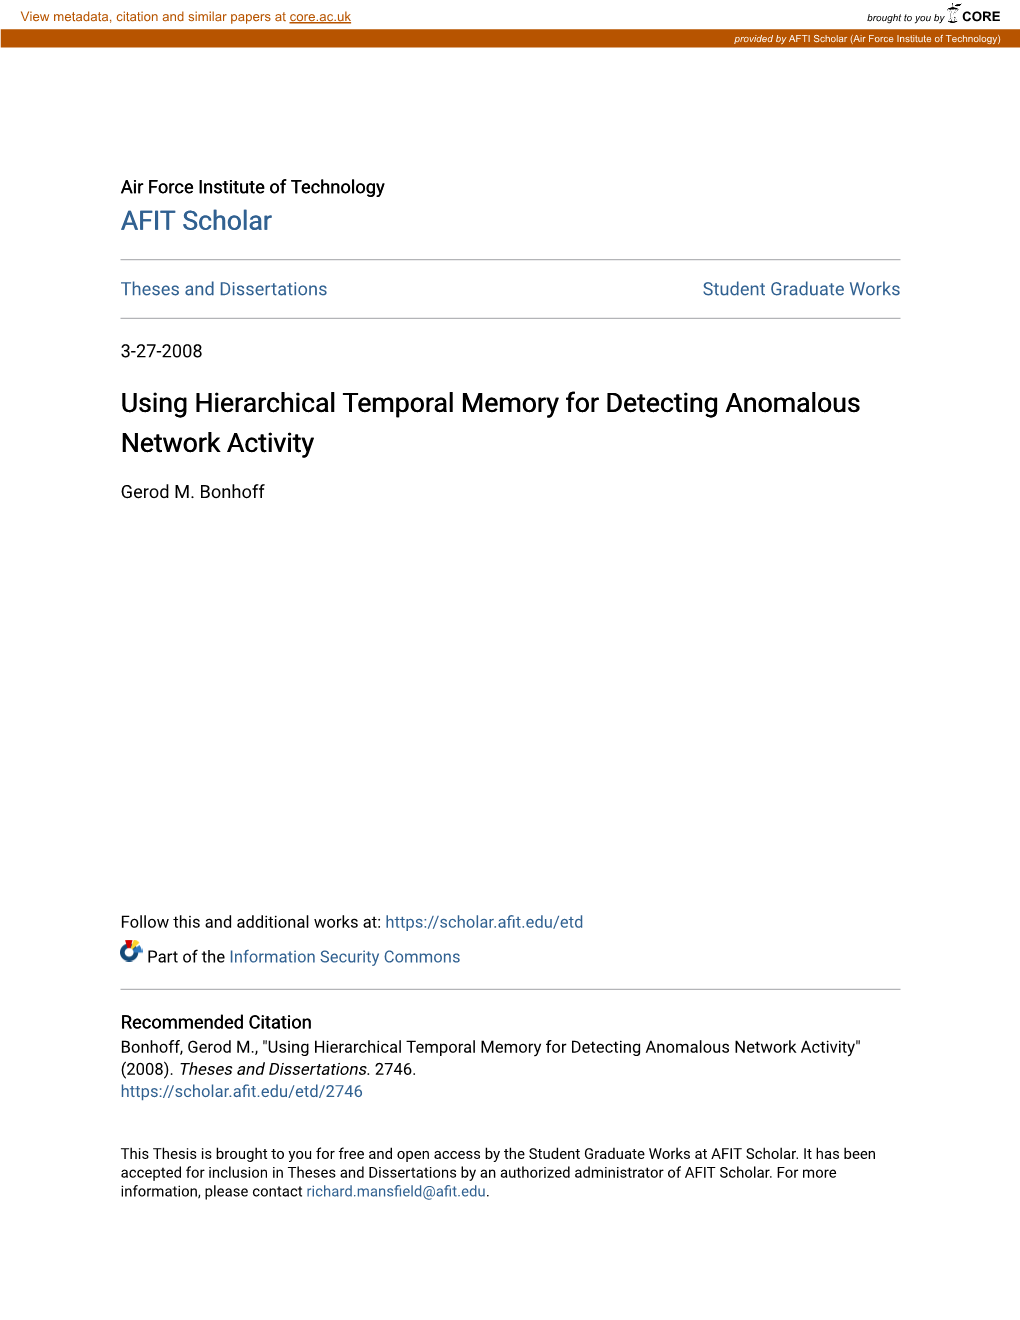 Using Hierarchical Temporal Memory for Detecting Anomalous Network Activity